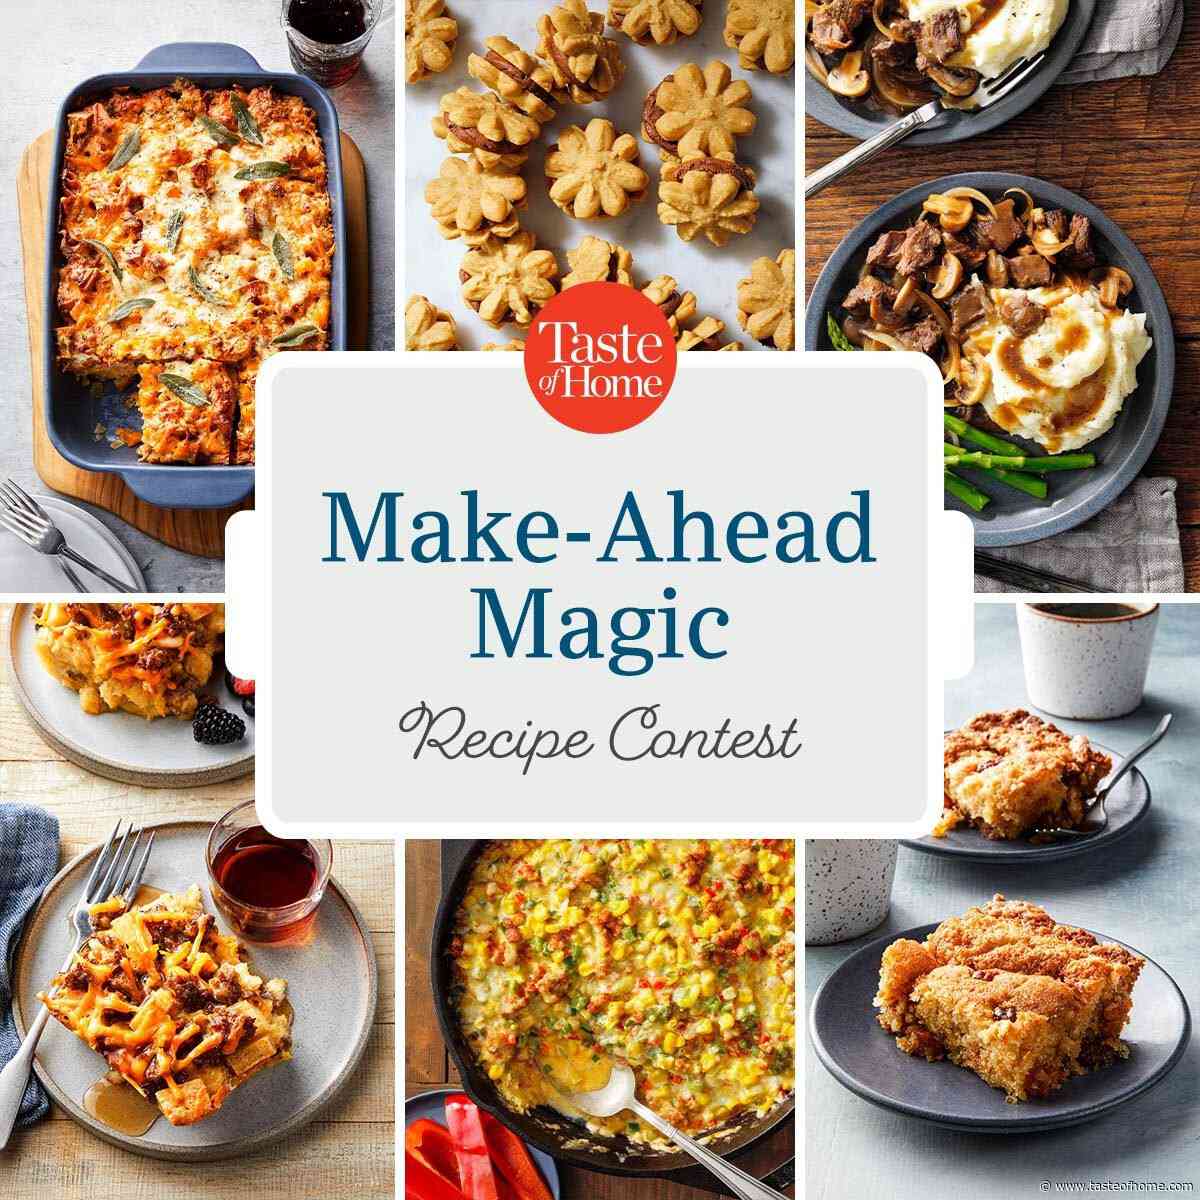 Presenting the Winners from Our Make-Ahead Magic Recipe Contest